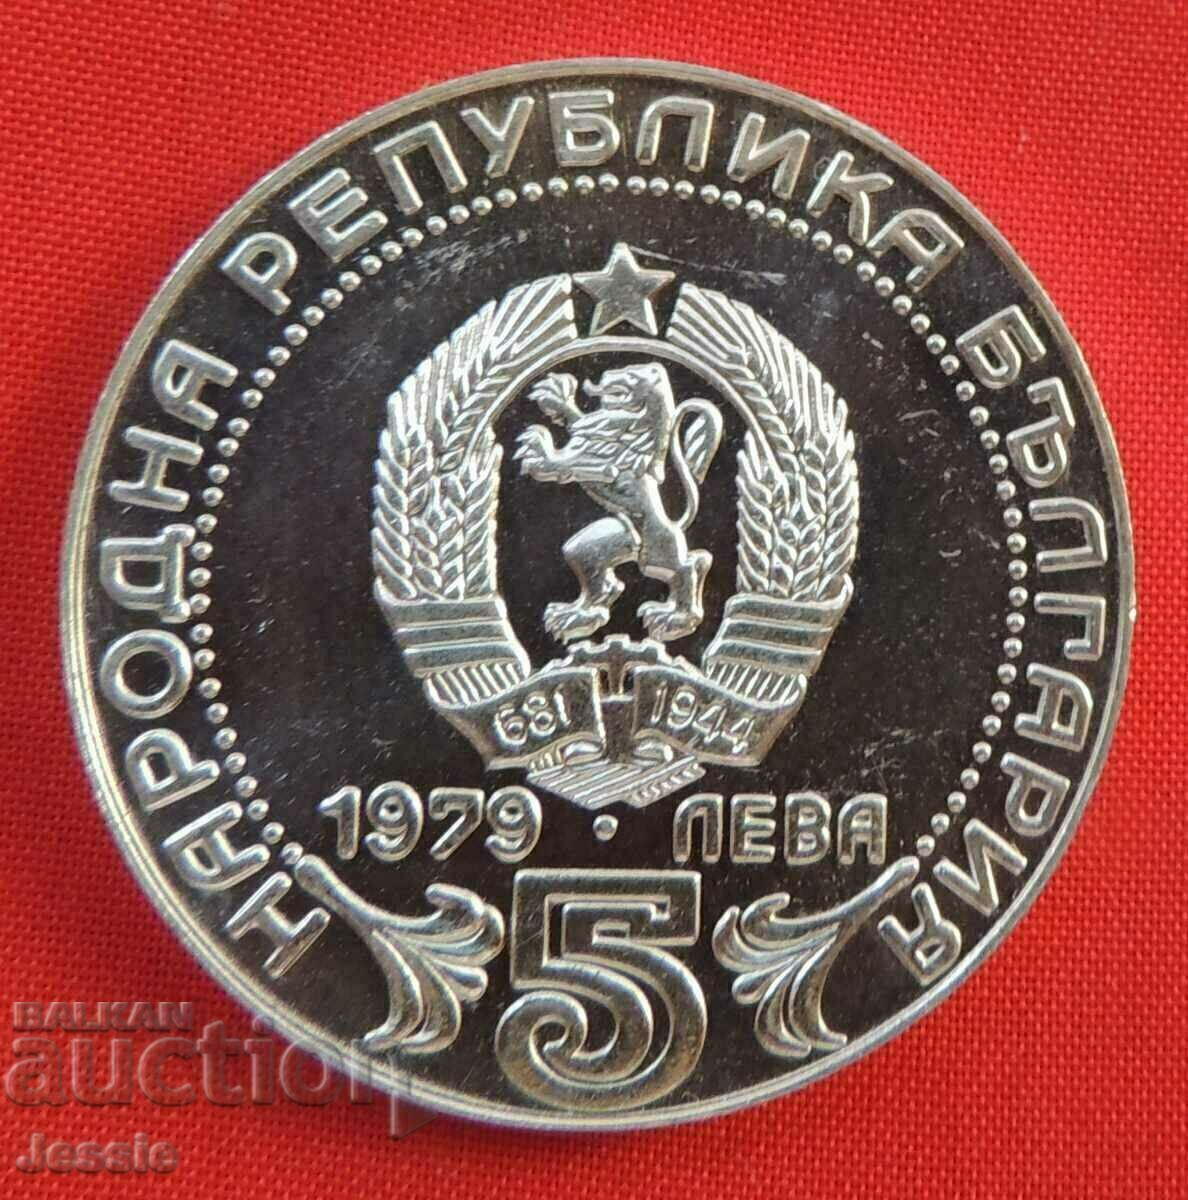 5 BGN 1979 o 100 years Bulgarian Announcements - SOLD OUT IN BNB